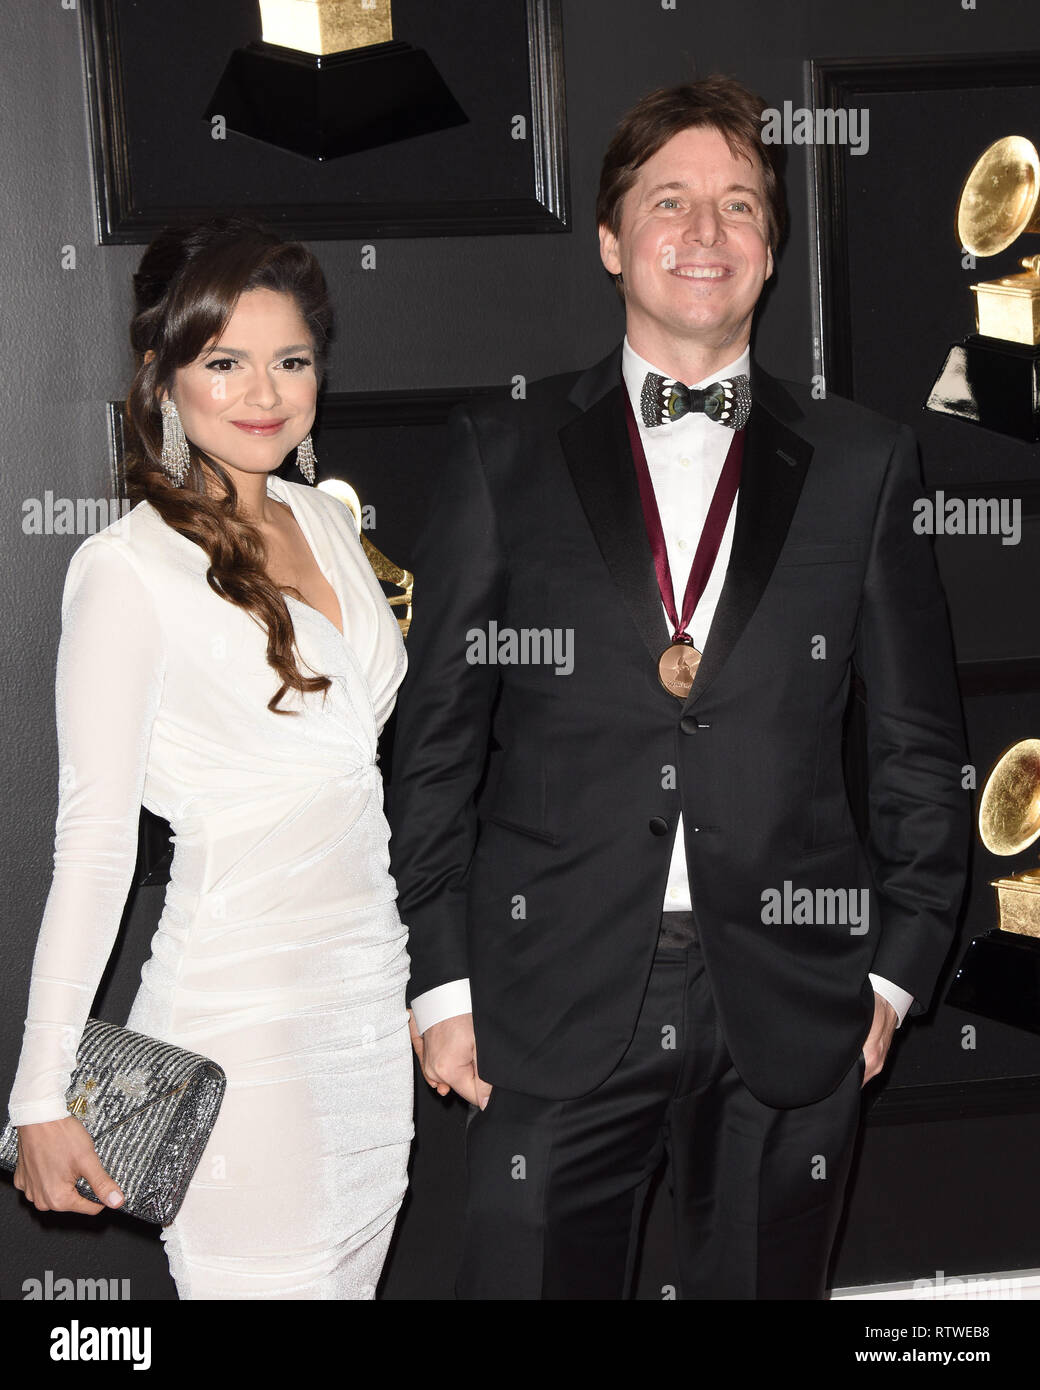 Los Angeles, CA, USA. 10th Feb, 2019. LOS ANGELES - FEB 10: Larisa Martinez, Joshua Bell at the 61st Grammy Awards at the Staples Center on February 10, 2019 in Los Angeles, CA Credit: Kay Blake/ZUMA Wire/Alamy Live News Stock Photo